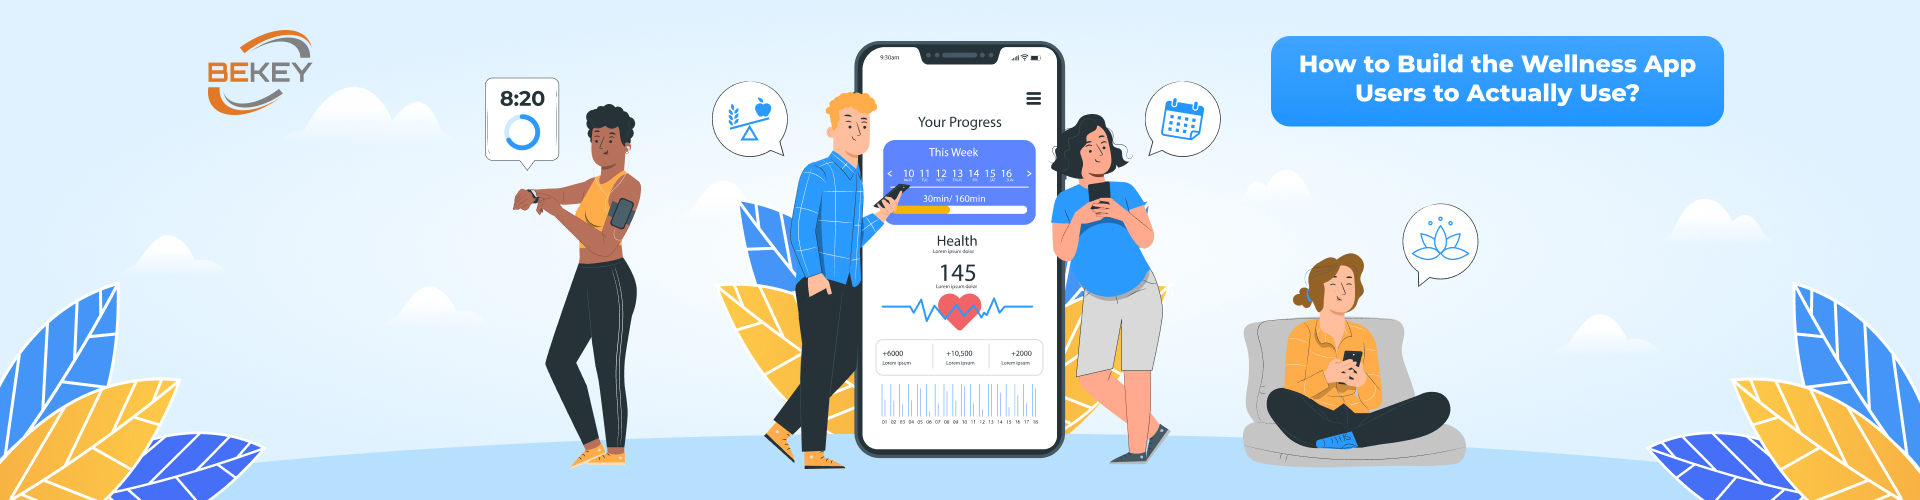 How to Build the Wellness App Users to Actually Use? - image